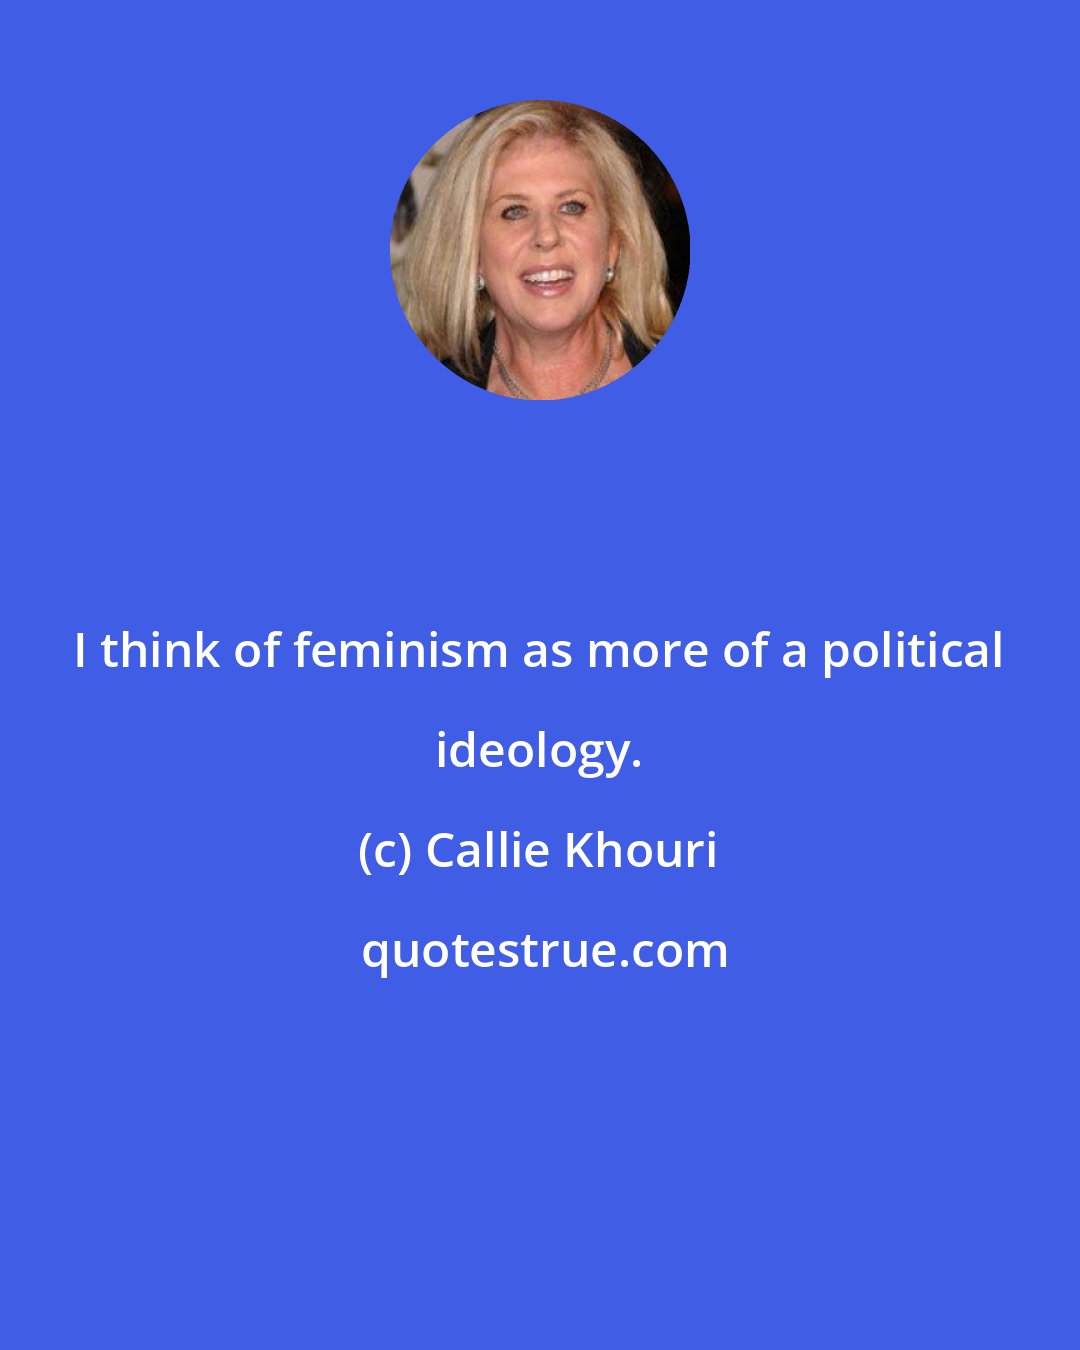 Callie Khouri: I think of feminism as more of a political ideology.